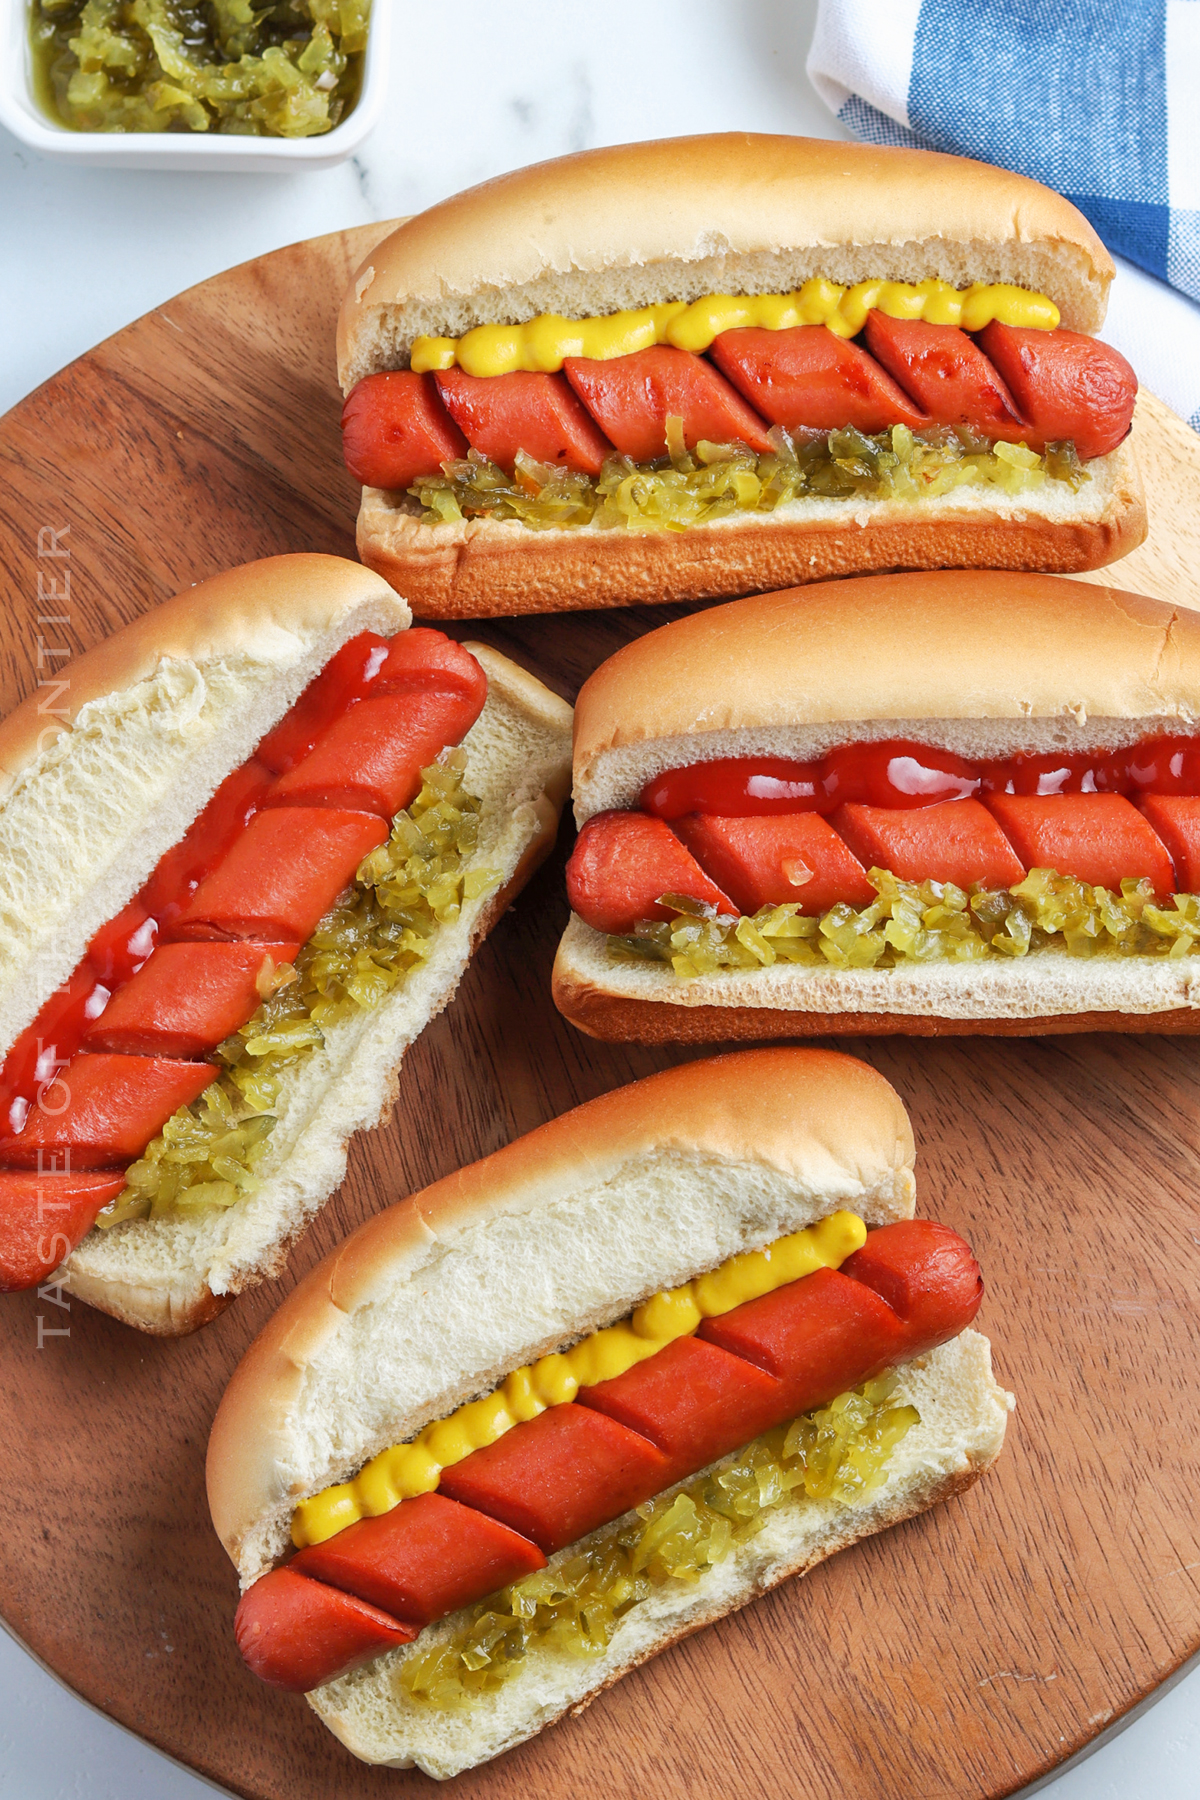 hot dogs with mustard and relish